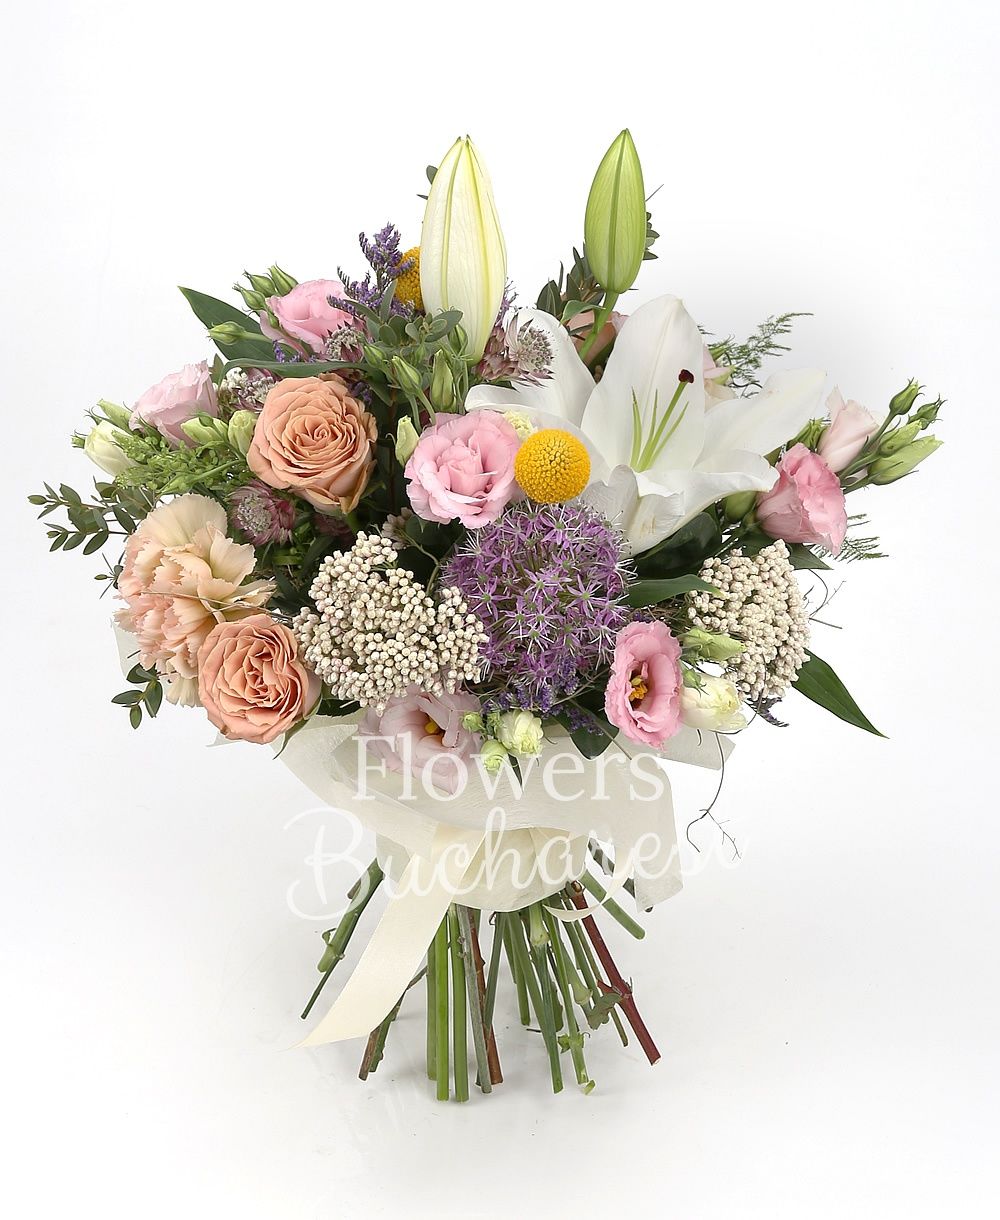 1 white imperial lily, 5 cappuccino roses, 3 cream carnations, 3 pink lisianthus, 3 rice flower, red astranția, 3 allium, greenery